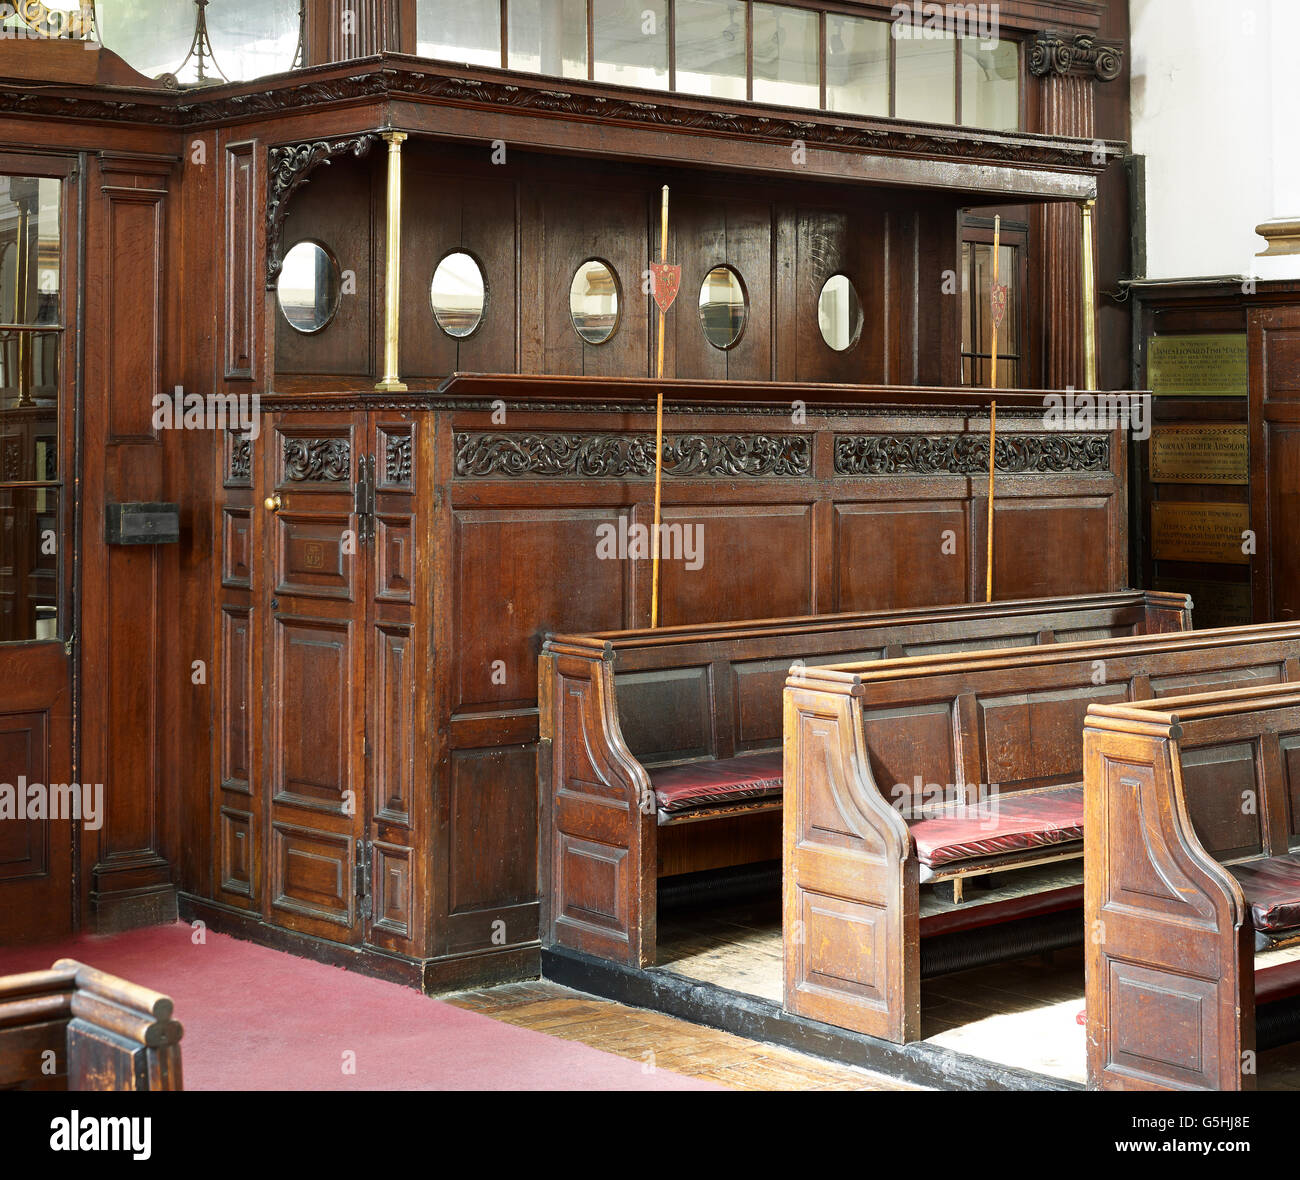 St Margaret Pattens, church in the City of London. Churchwardens pews Stock Photo